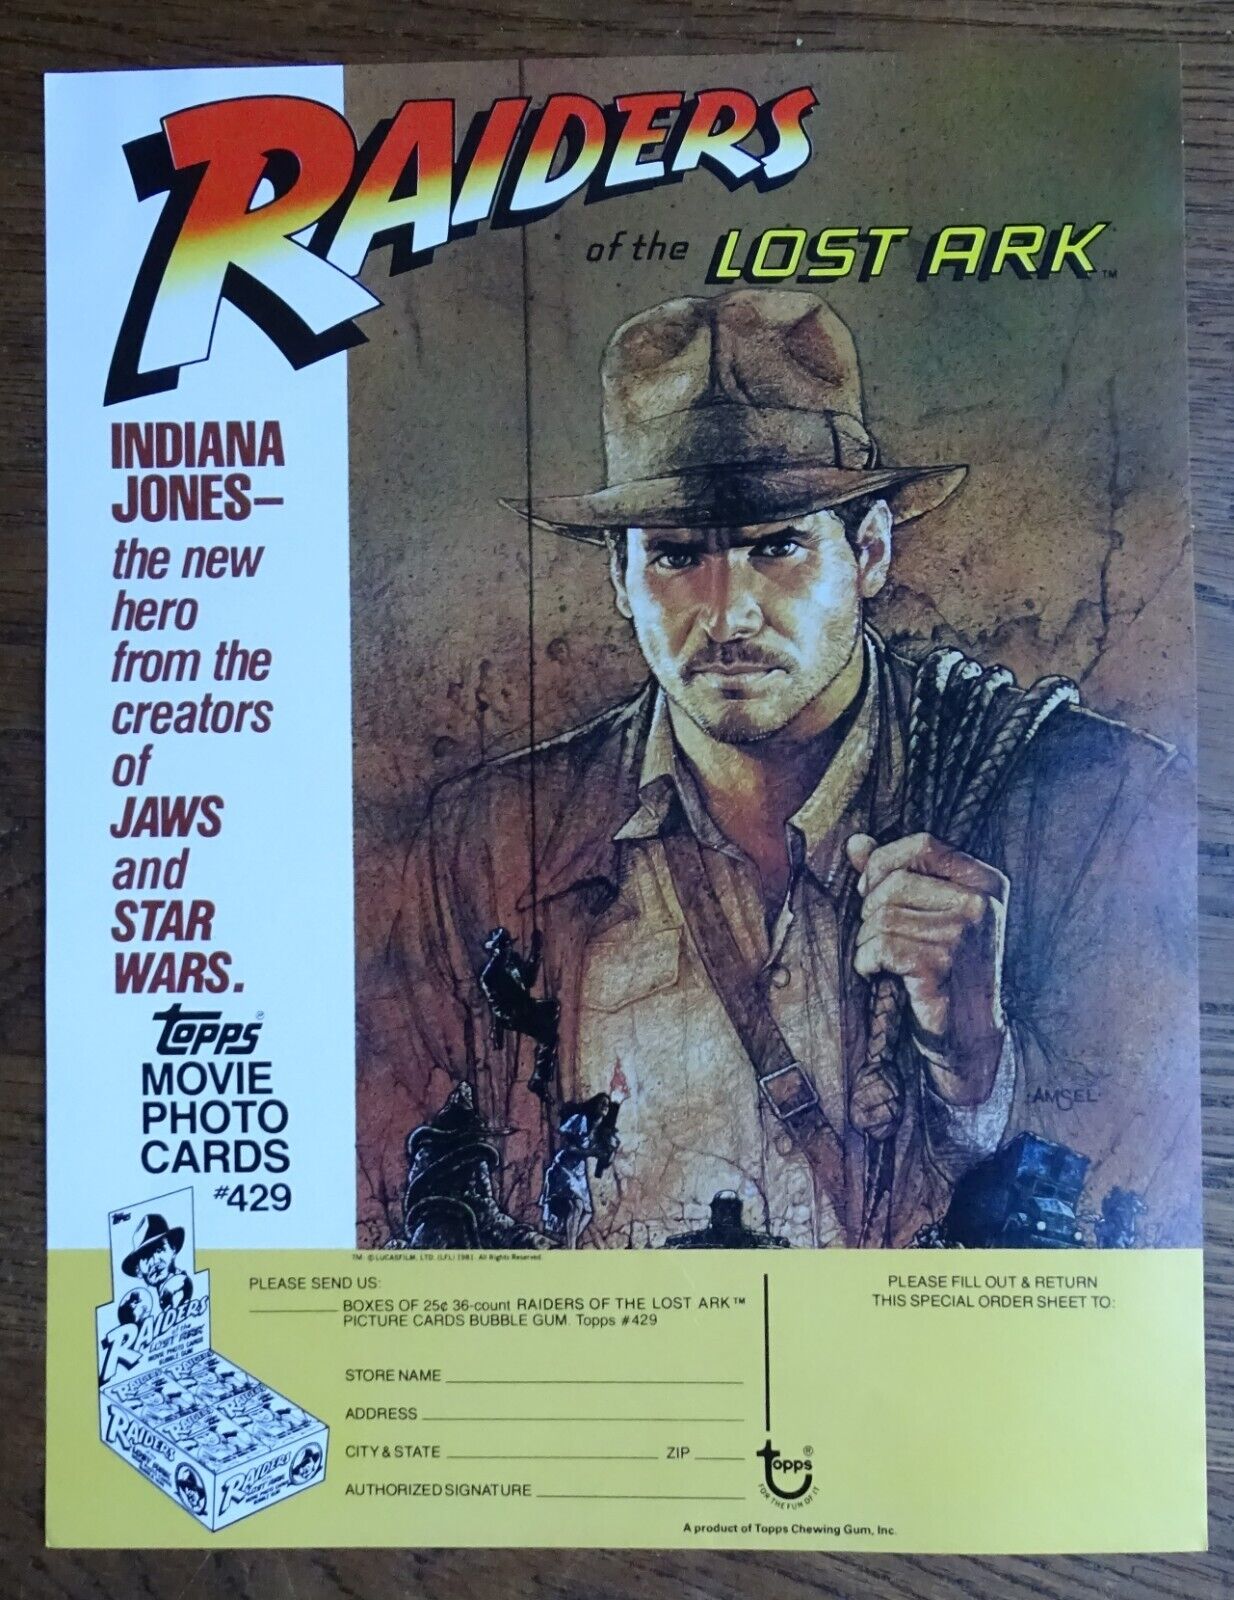 1981 Topps Raiders of the Lost Ark Sell Sheet (NO CARDS) Harrison Ford pictured 